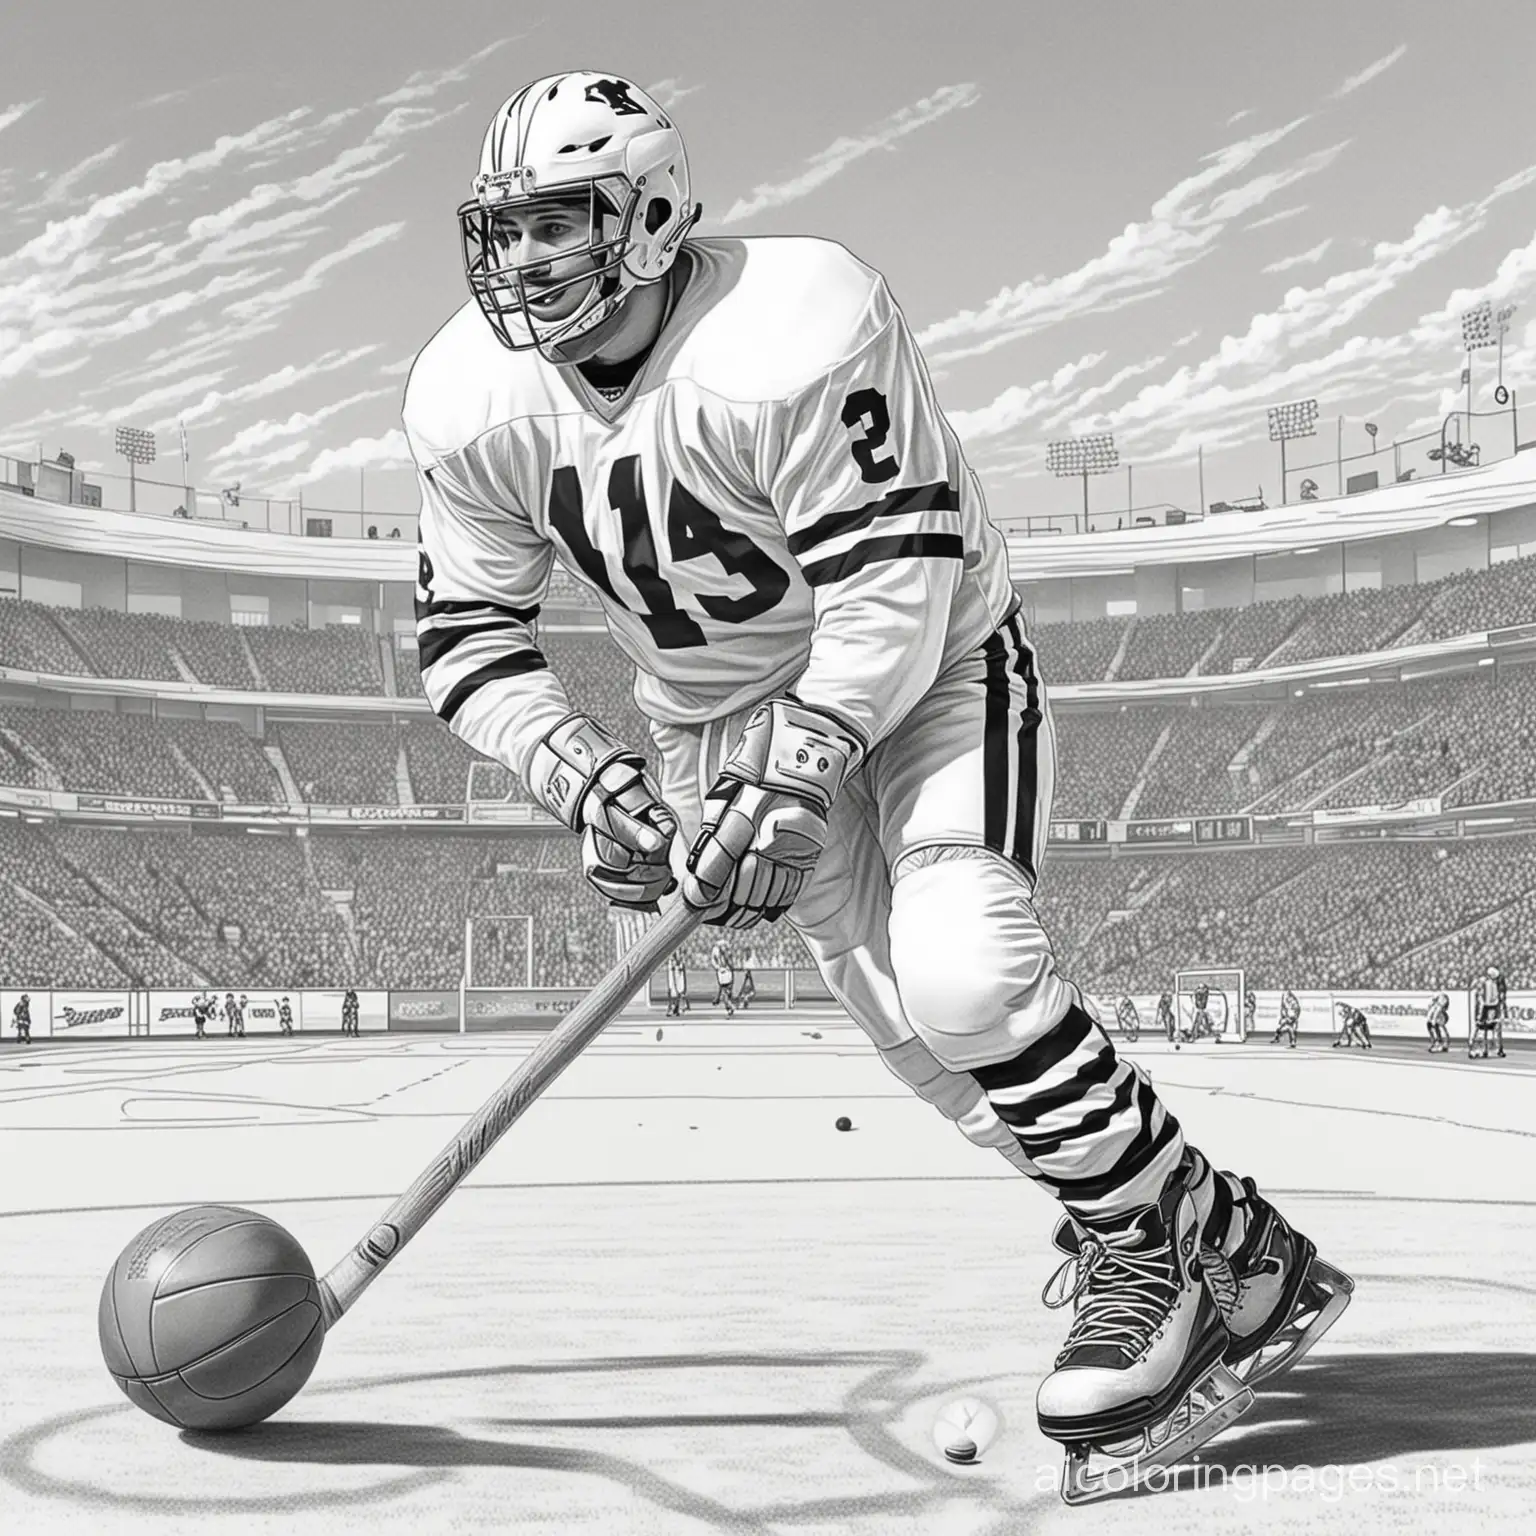 black and white, a Professional Football Quarterback wearing hockey skates as he dribbles a basketball with one hand, he is holding baseball bat with his other hand, background is a basketball stadium, Coloring Page, black and white, line art, white background, Simplicity, Ample White Space. The background of the coloring page is plain white to make it easy for young children to color within the lines. The outlines of all the subjects are easy to distinguish, making it simple for kids to color without too much difficulty